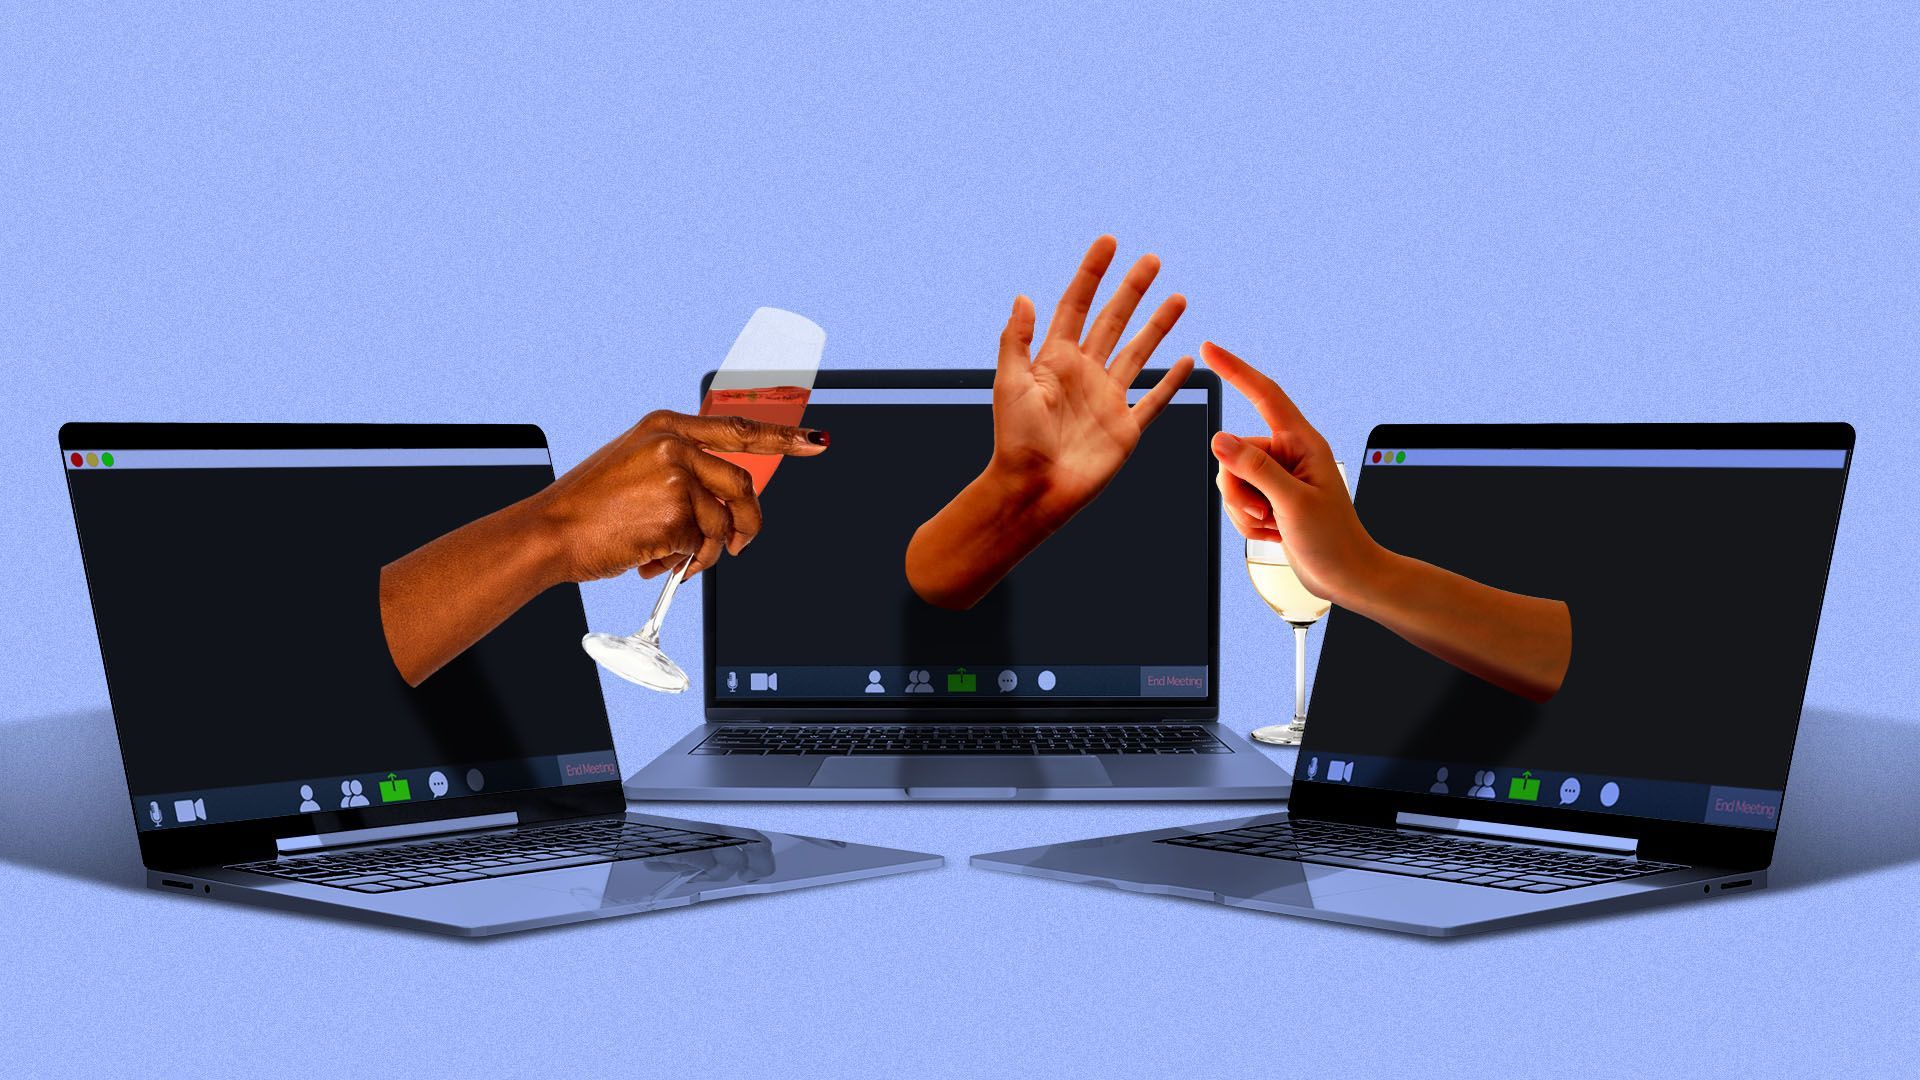 Illustration of three laptops facing each other with hands emerging from the screens interacting with one another 